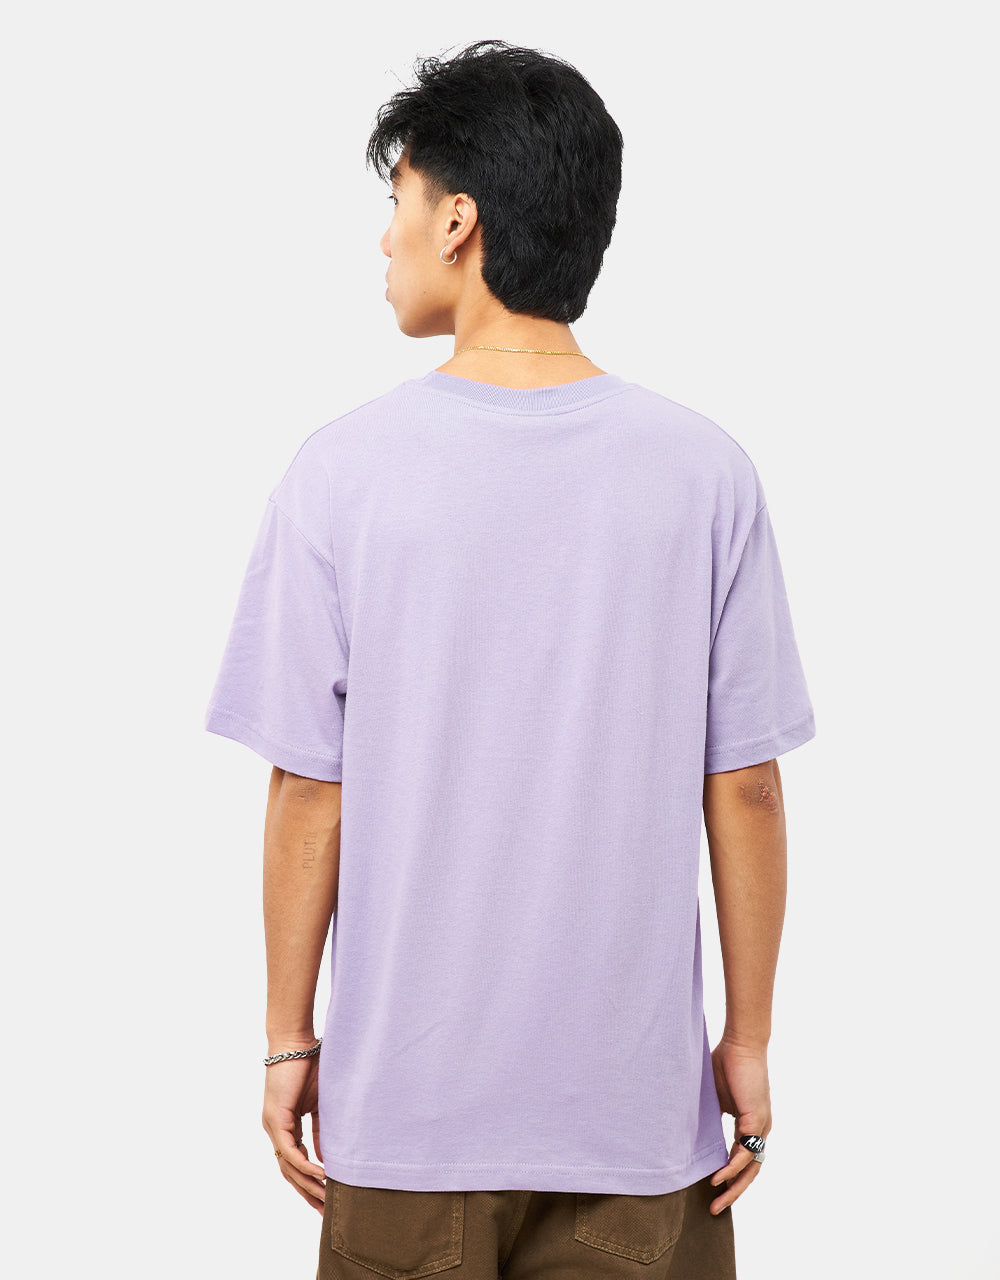 Route One Worldwide Chillers T-Shirt - Orchid